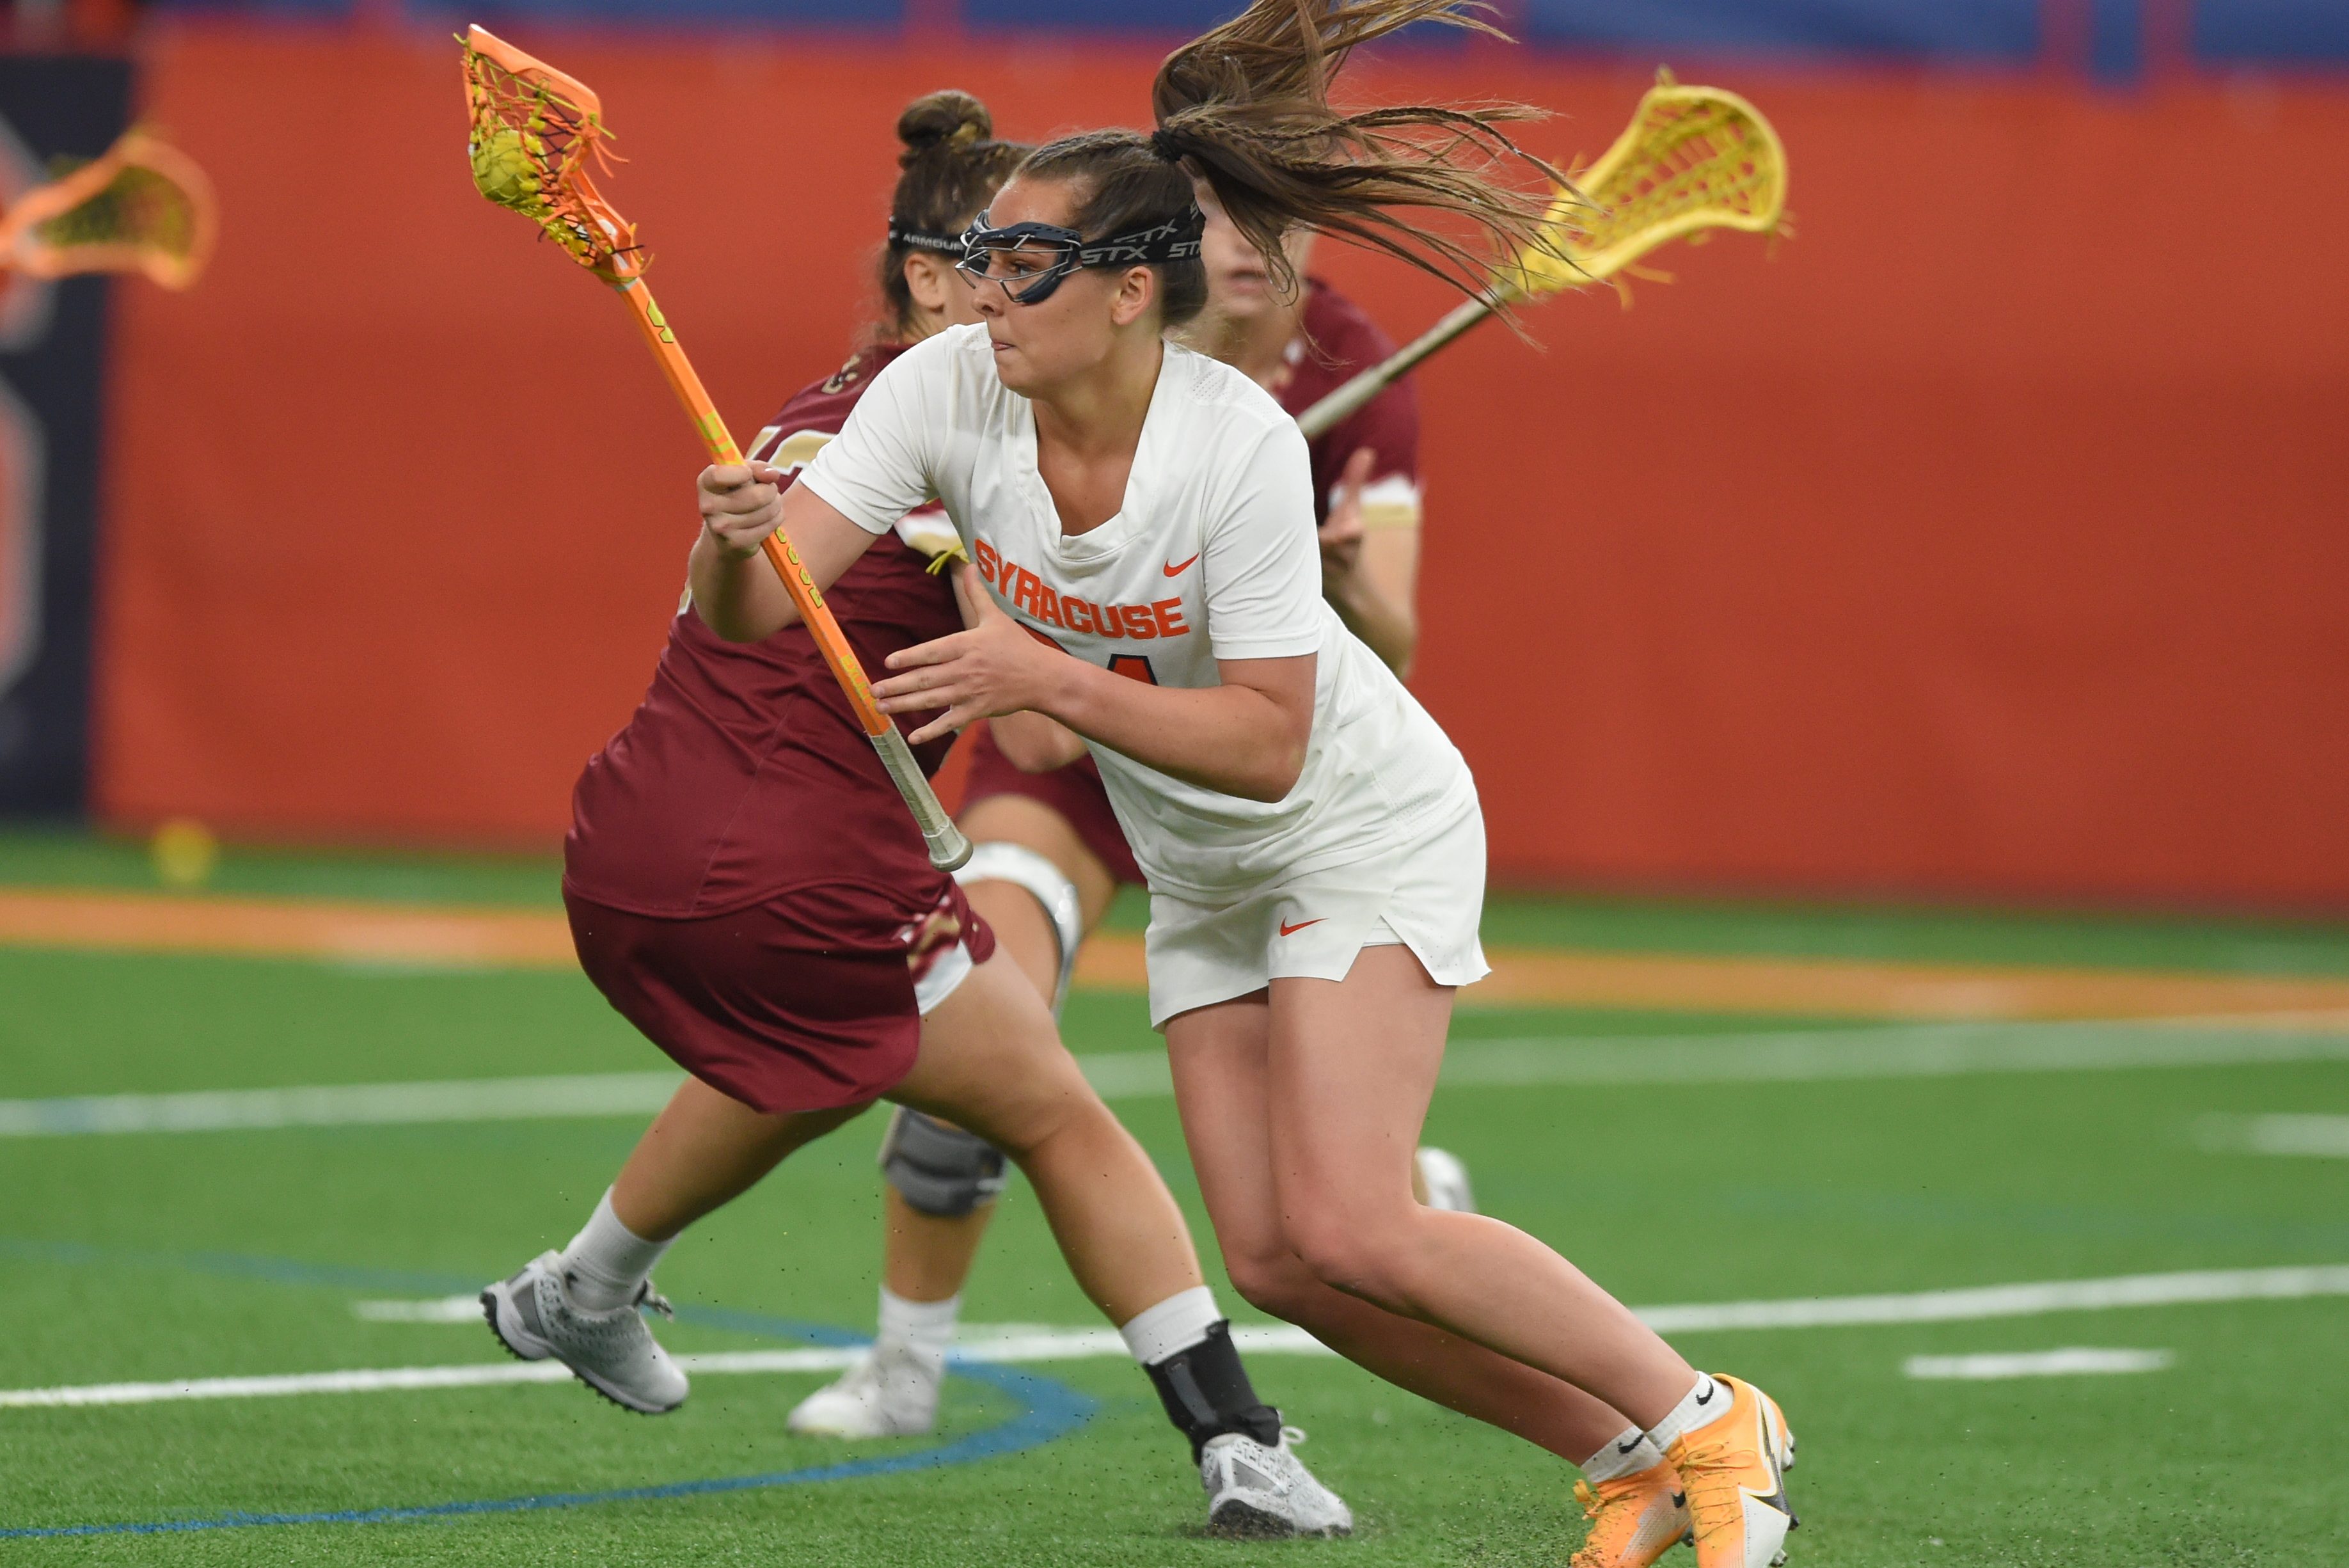 Syracuse women’s lacrosse closes season in decisive rematch victory